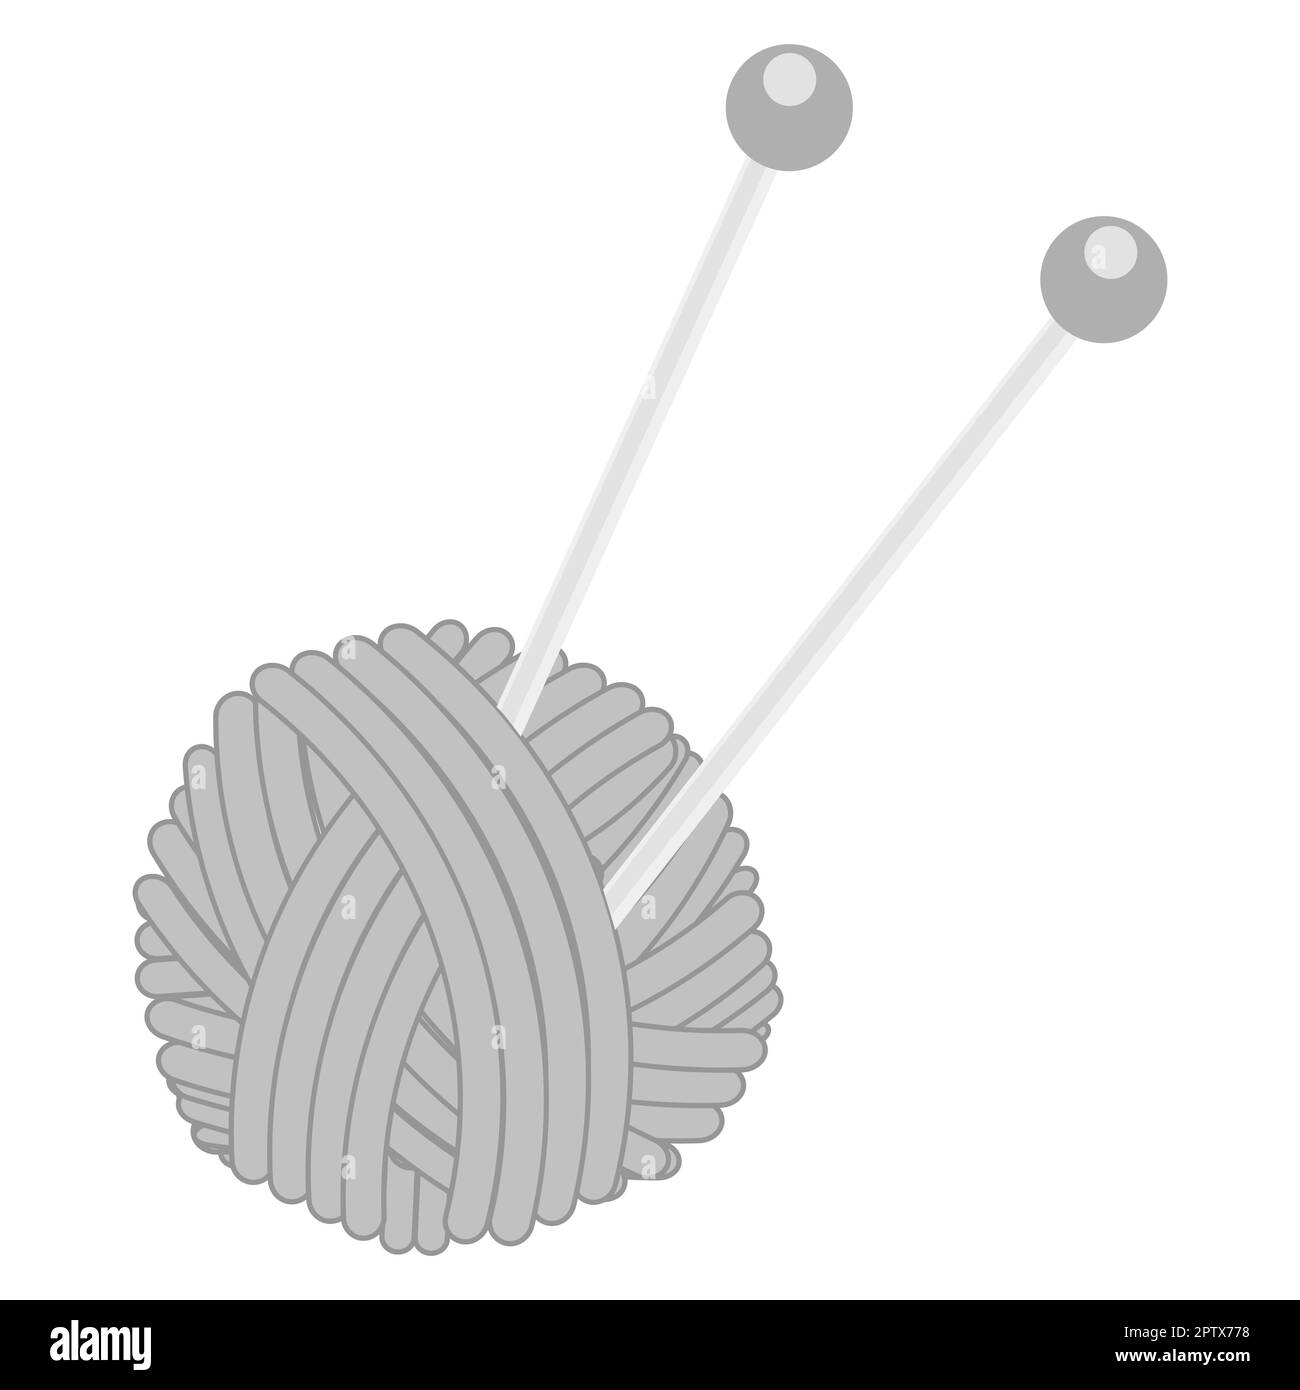 Balls of yarn with knitting needles on white background Stock Photo by  AtlasComposer